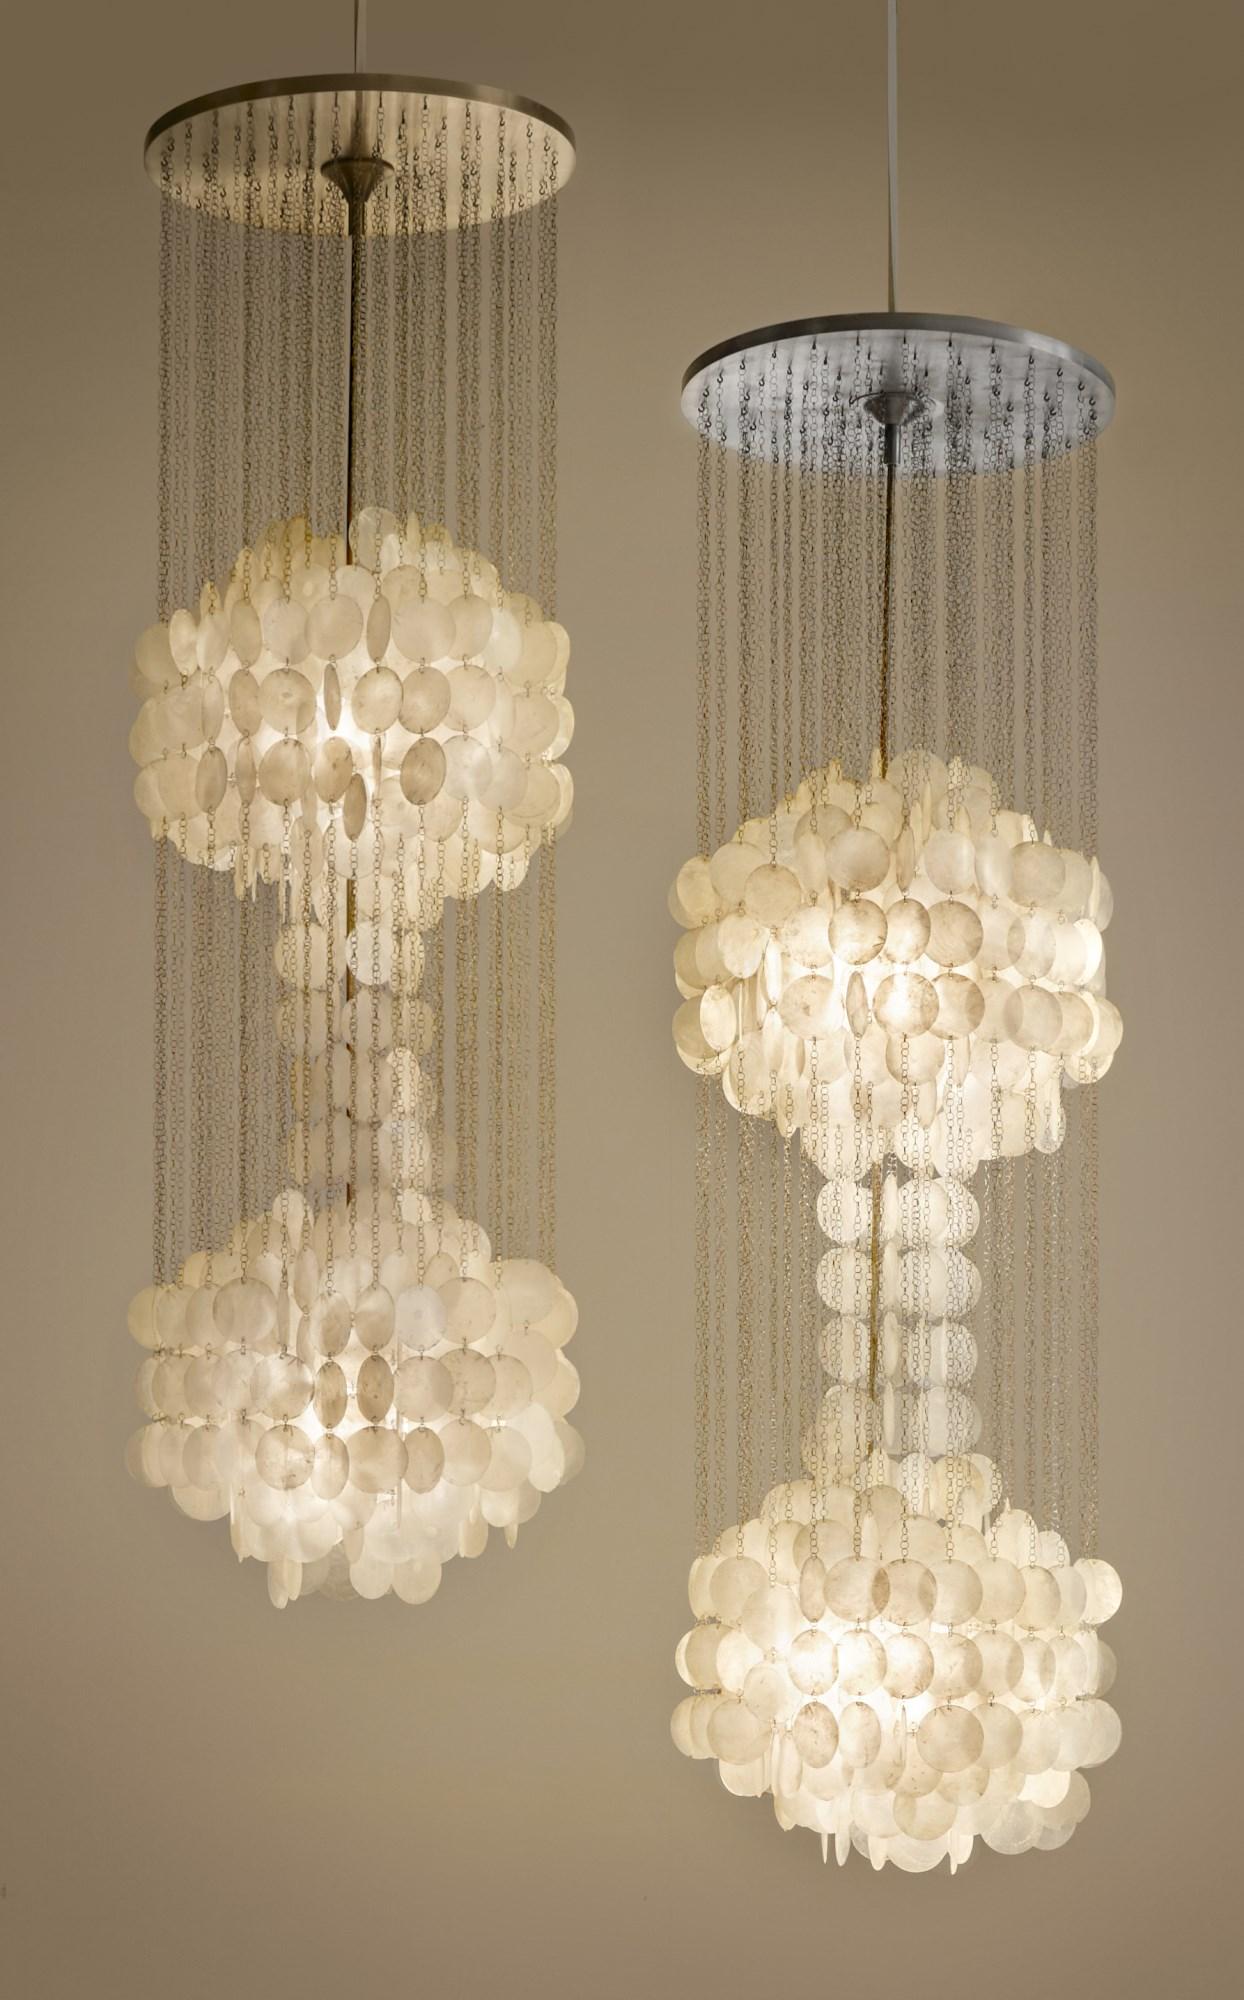 Vintage chandelier in steel and seashell pellets.
Italy, 1970s.

Brass one is sold.
Only steel model remaining.